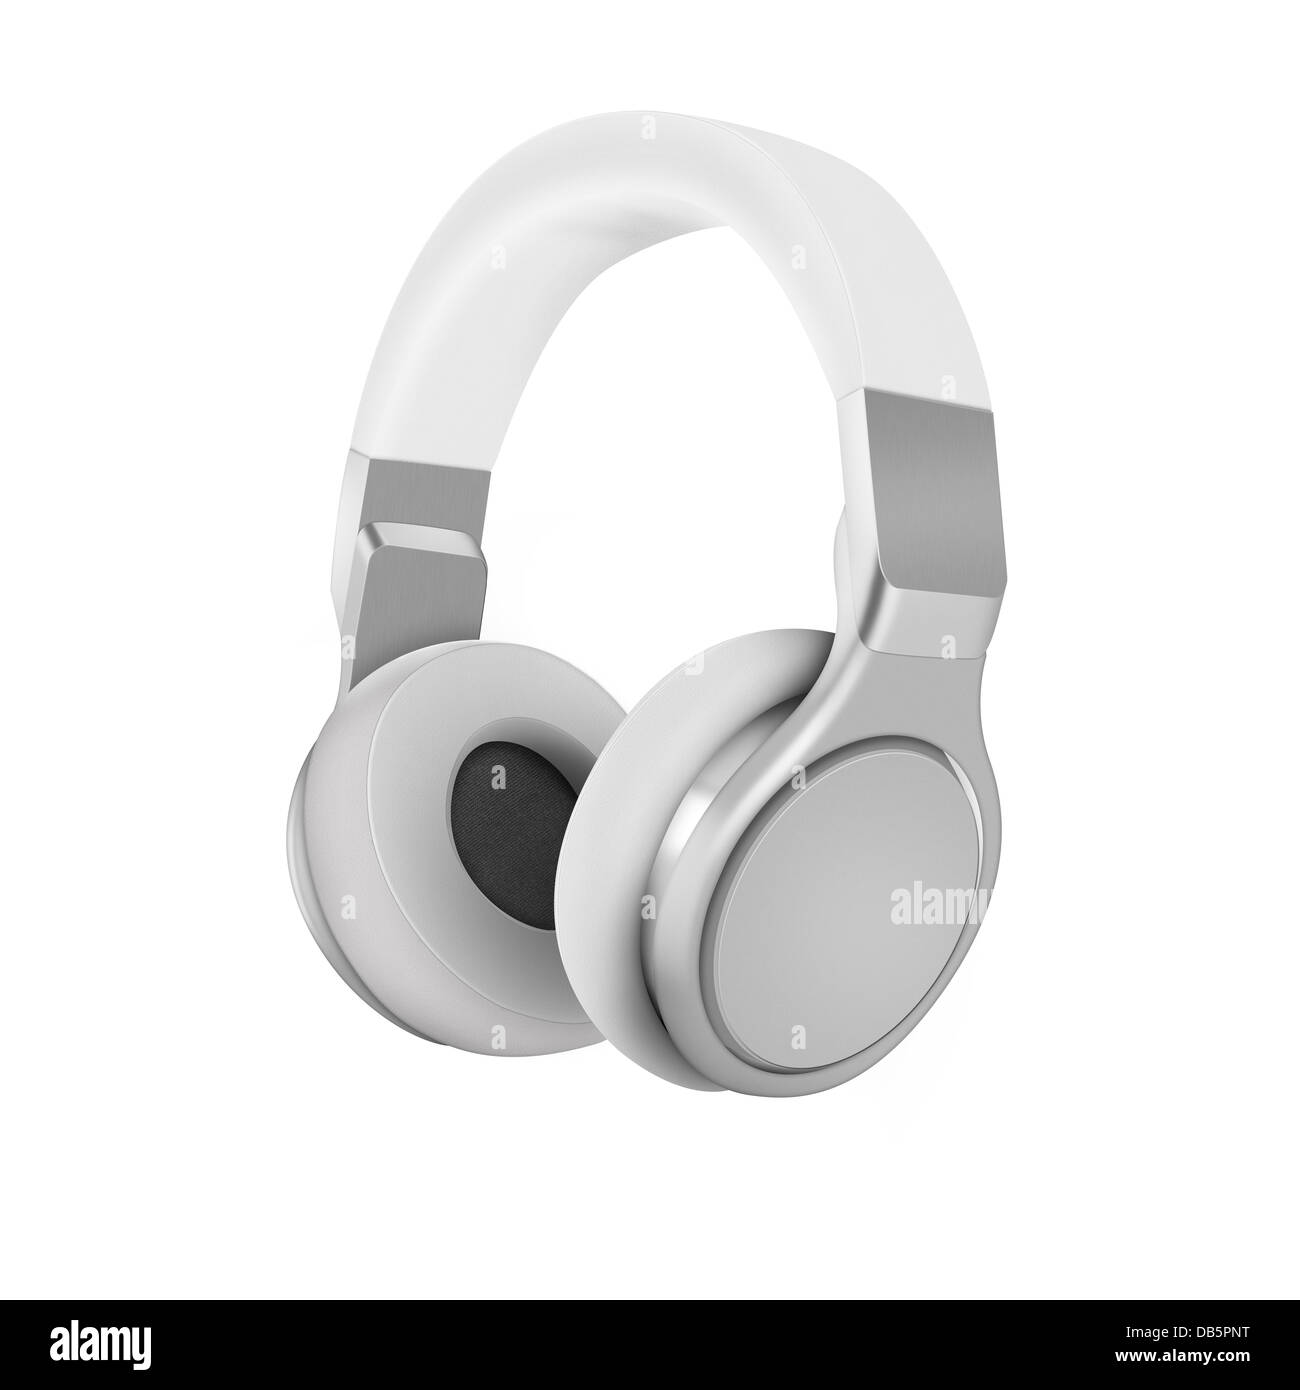 Modern, professional music headphones with padded speakers isloated on a white background with clipping path. Stock Photo